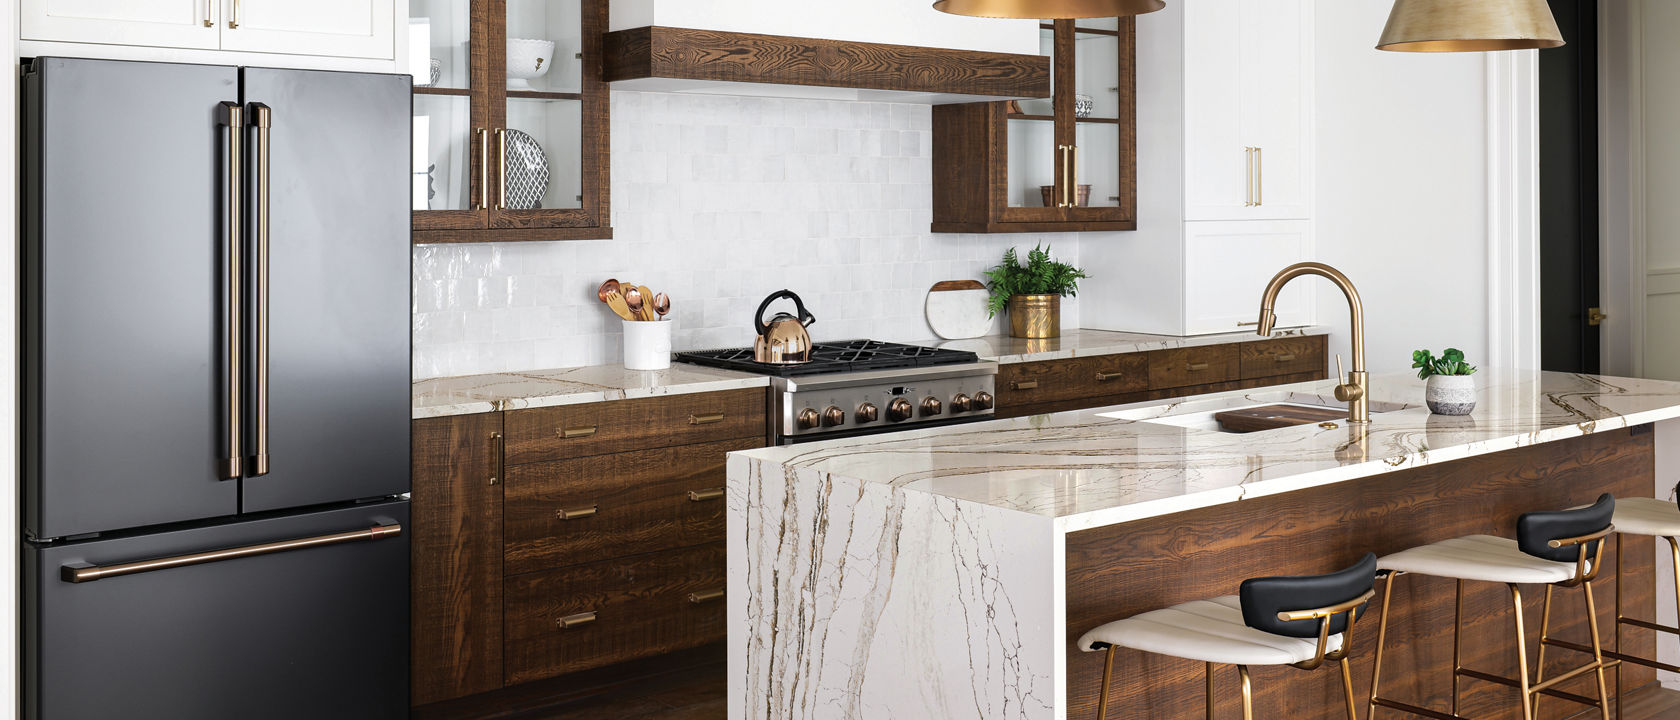 Copper-and-brown-veined Cambria Clovelly quartz countertops in a kitchen.